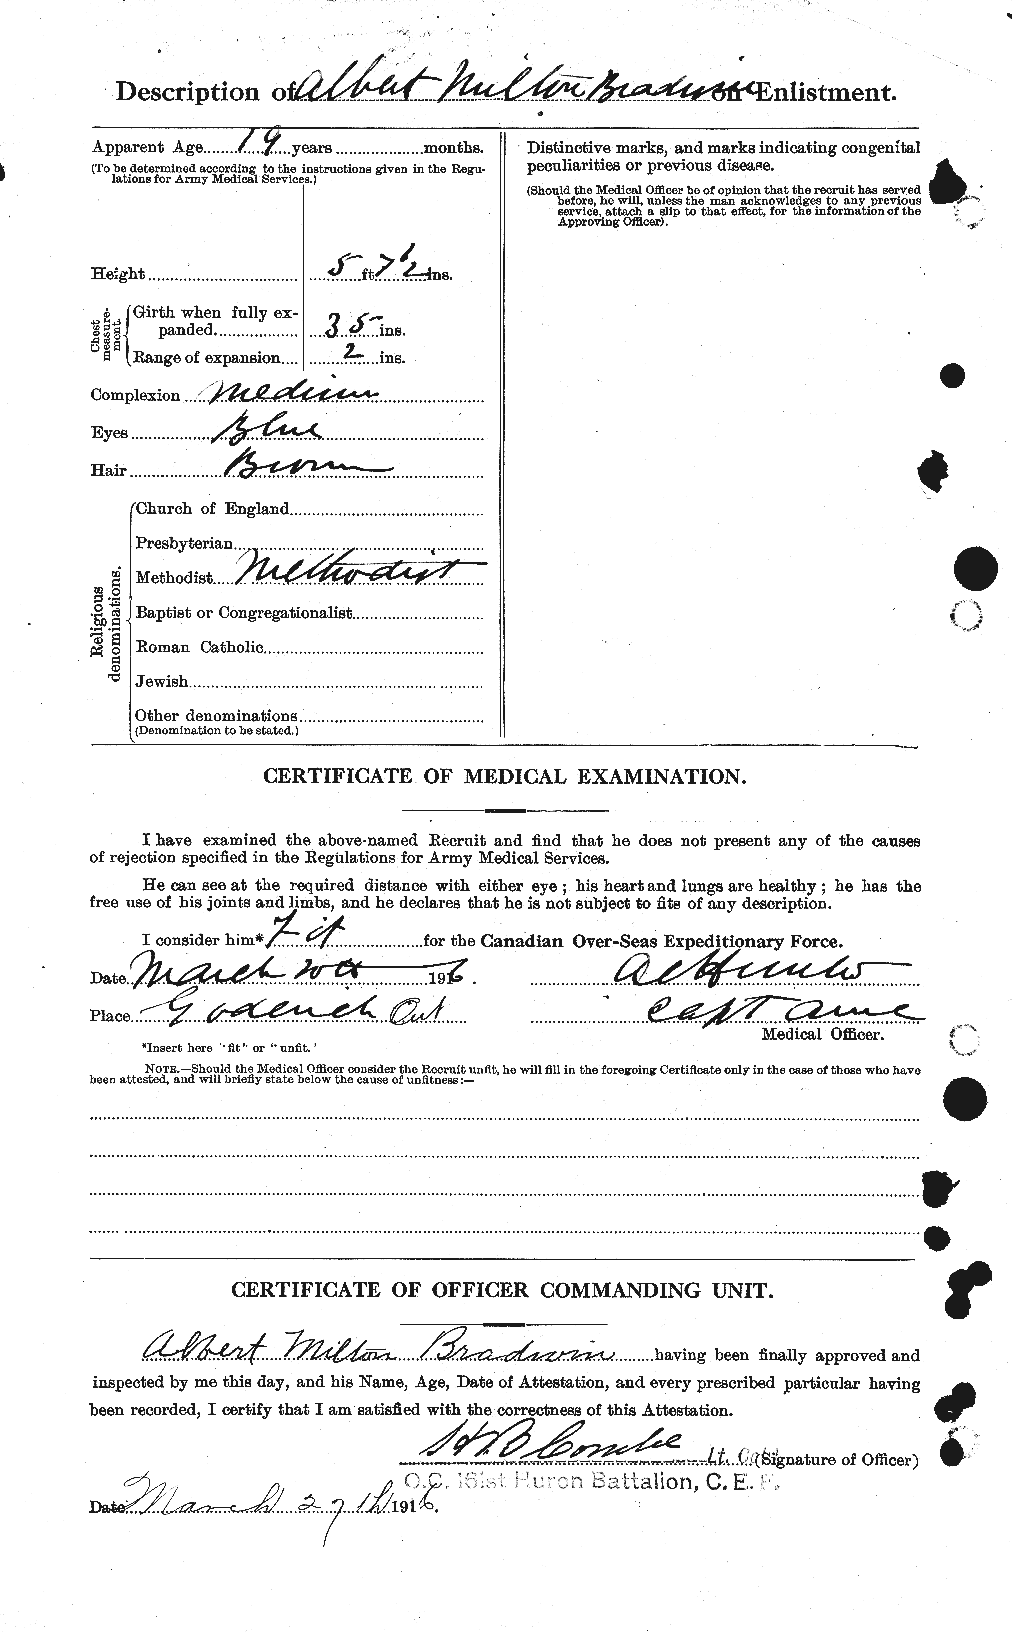 Personnel Records of the First World War - CEF 257103b